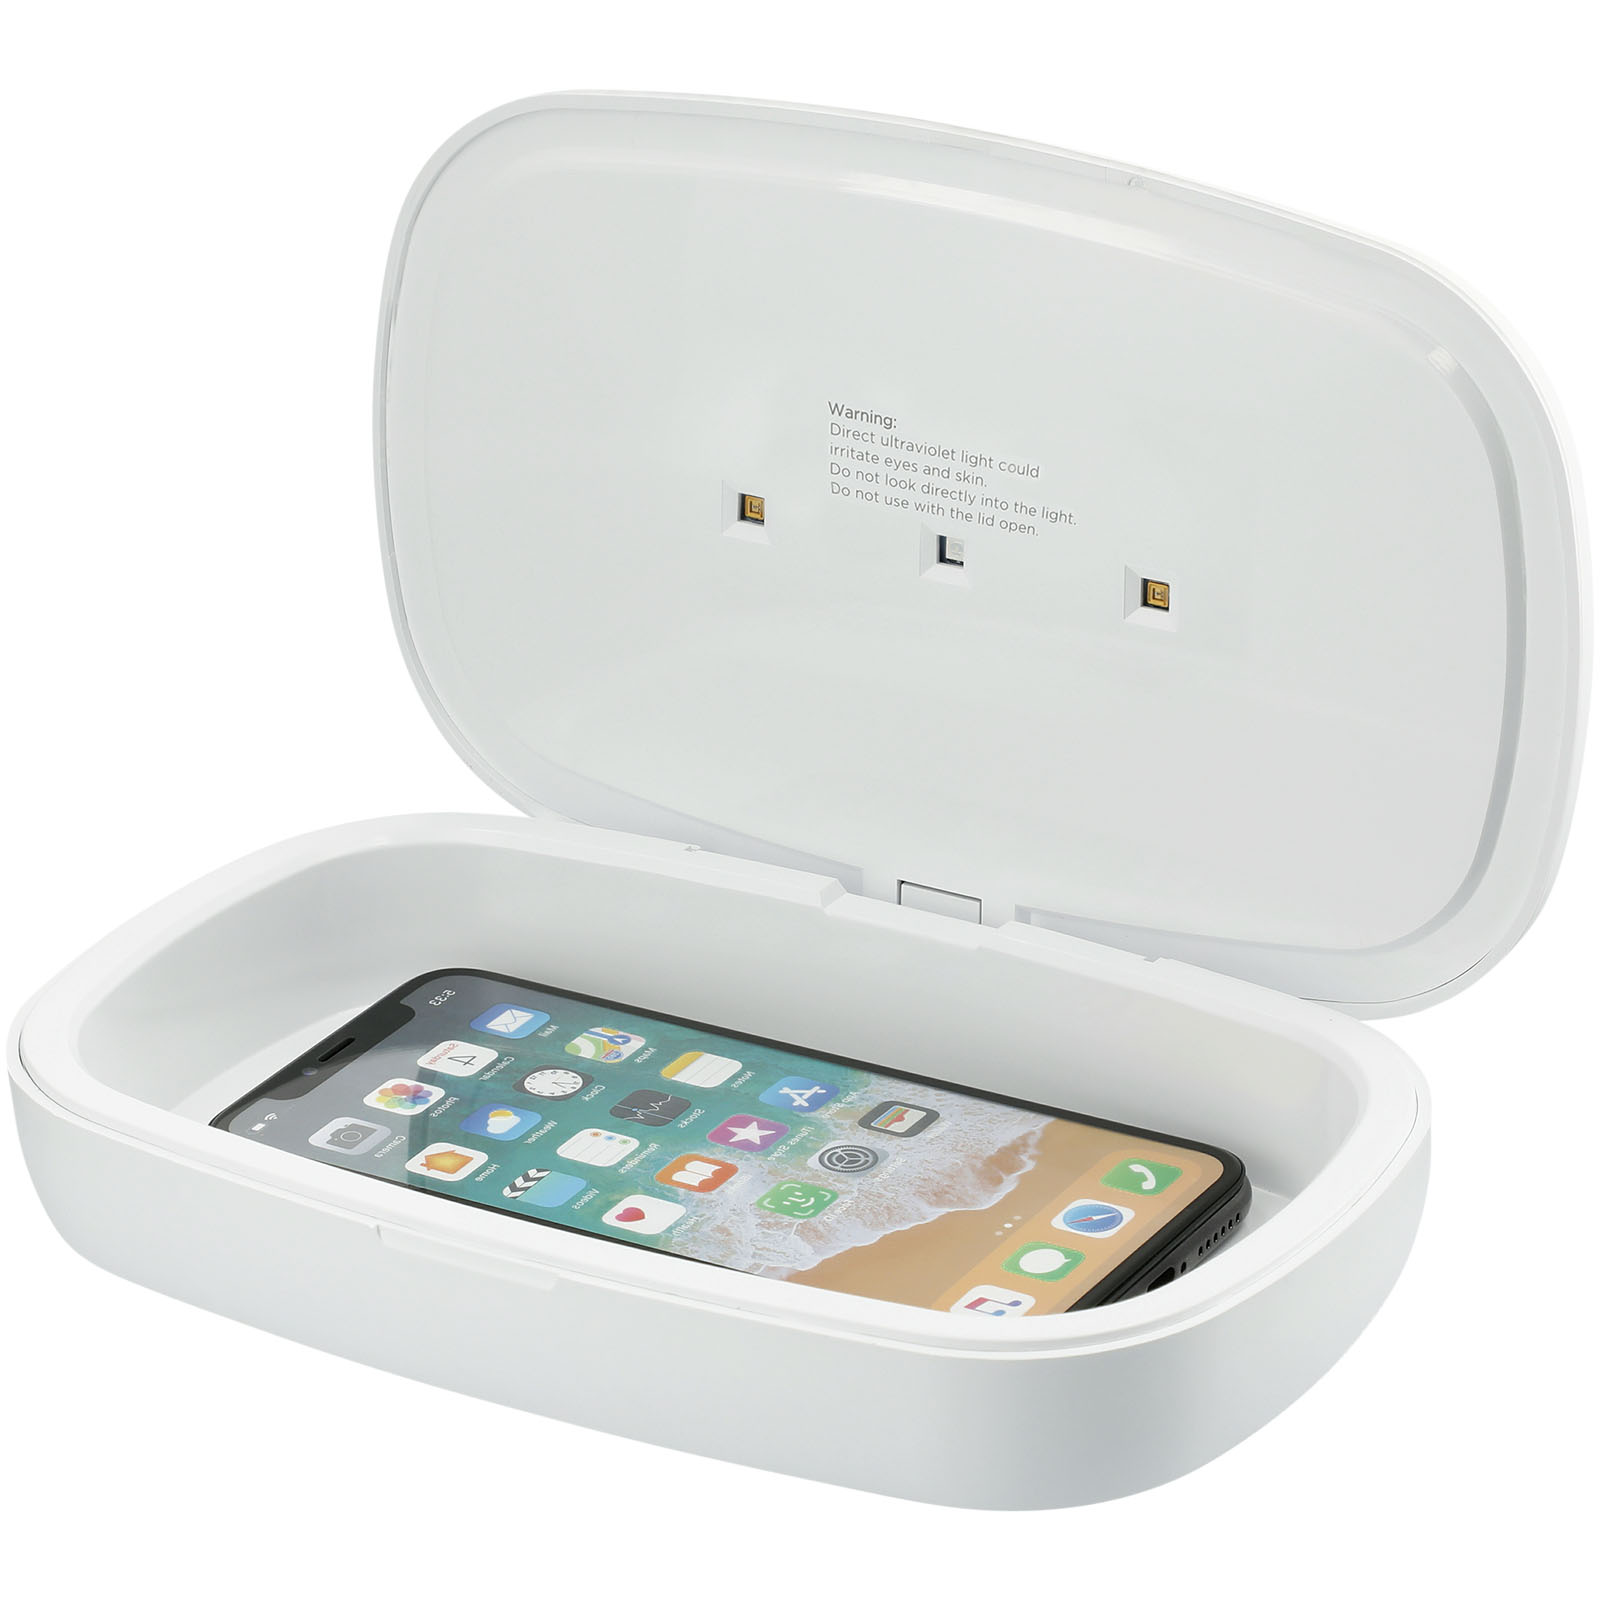 Technology - Capsule UV smartphone sanitizer with 5W wireless charging pad